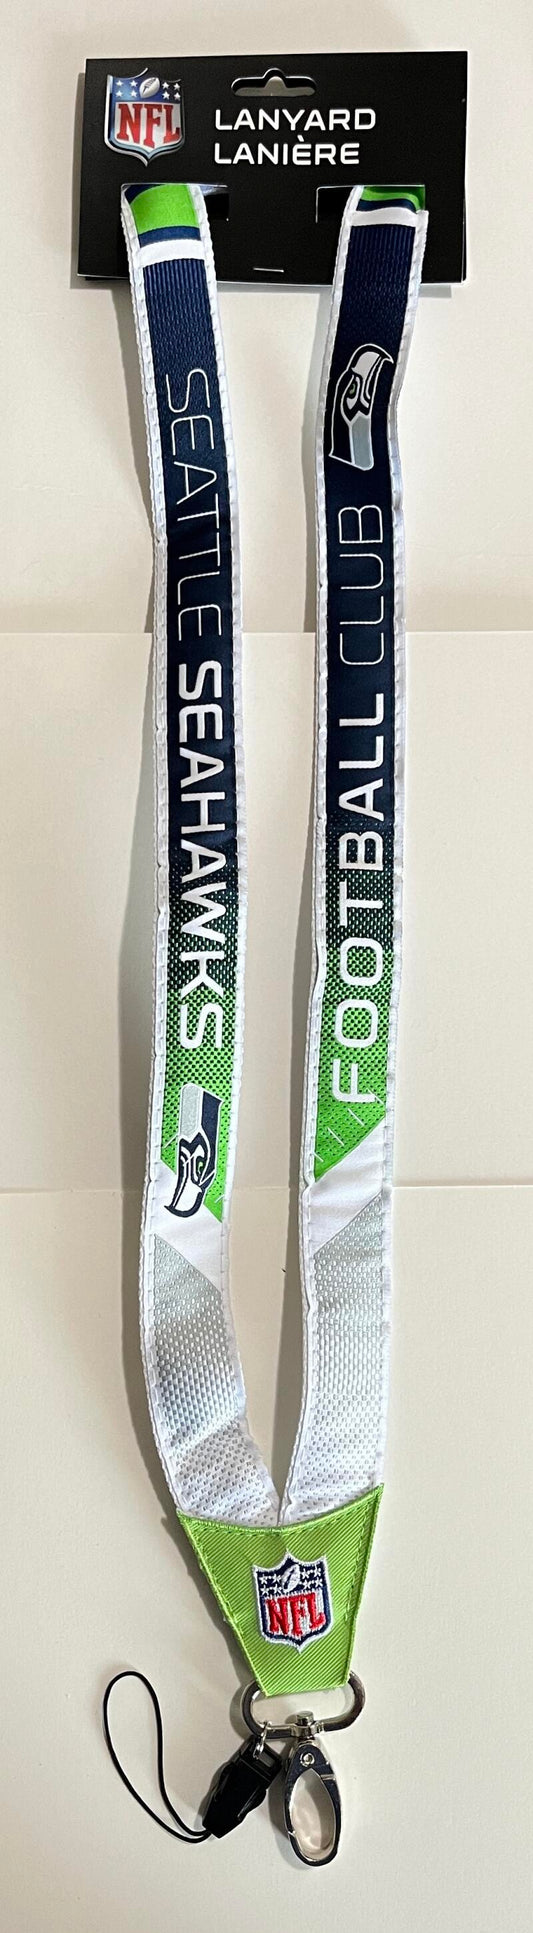 Seattle Seahawks Woven Licensed NFL Football Lanyard Metal Clasp Image 1